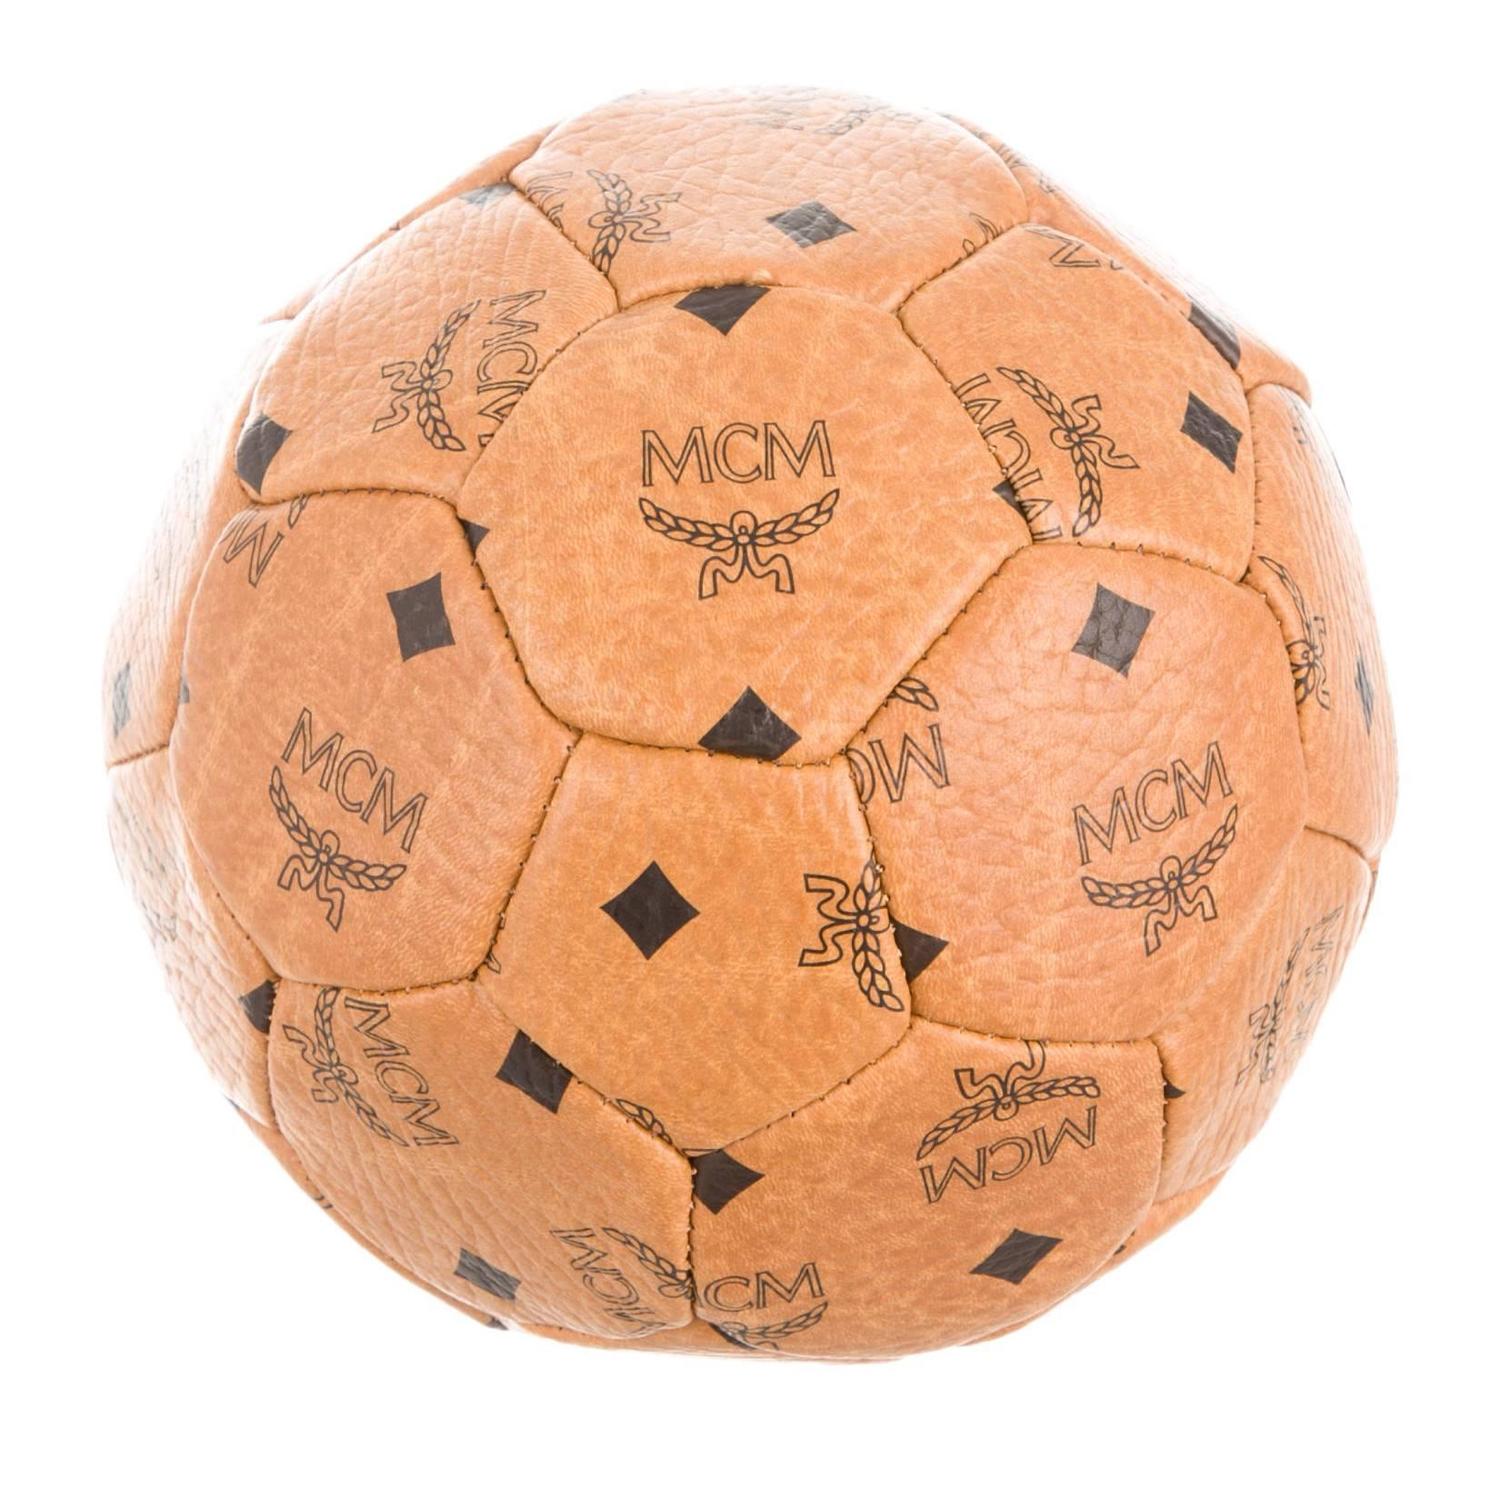 Louis Vuitton 1998 Pre-owned World Cup Ball - Brown